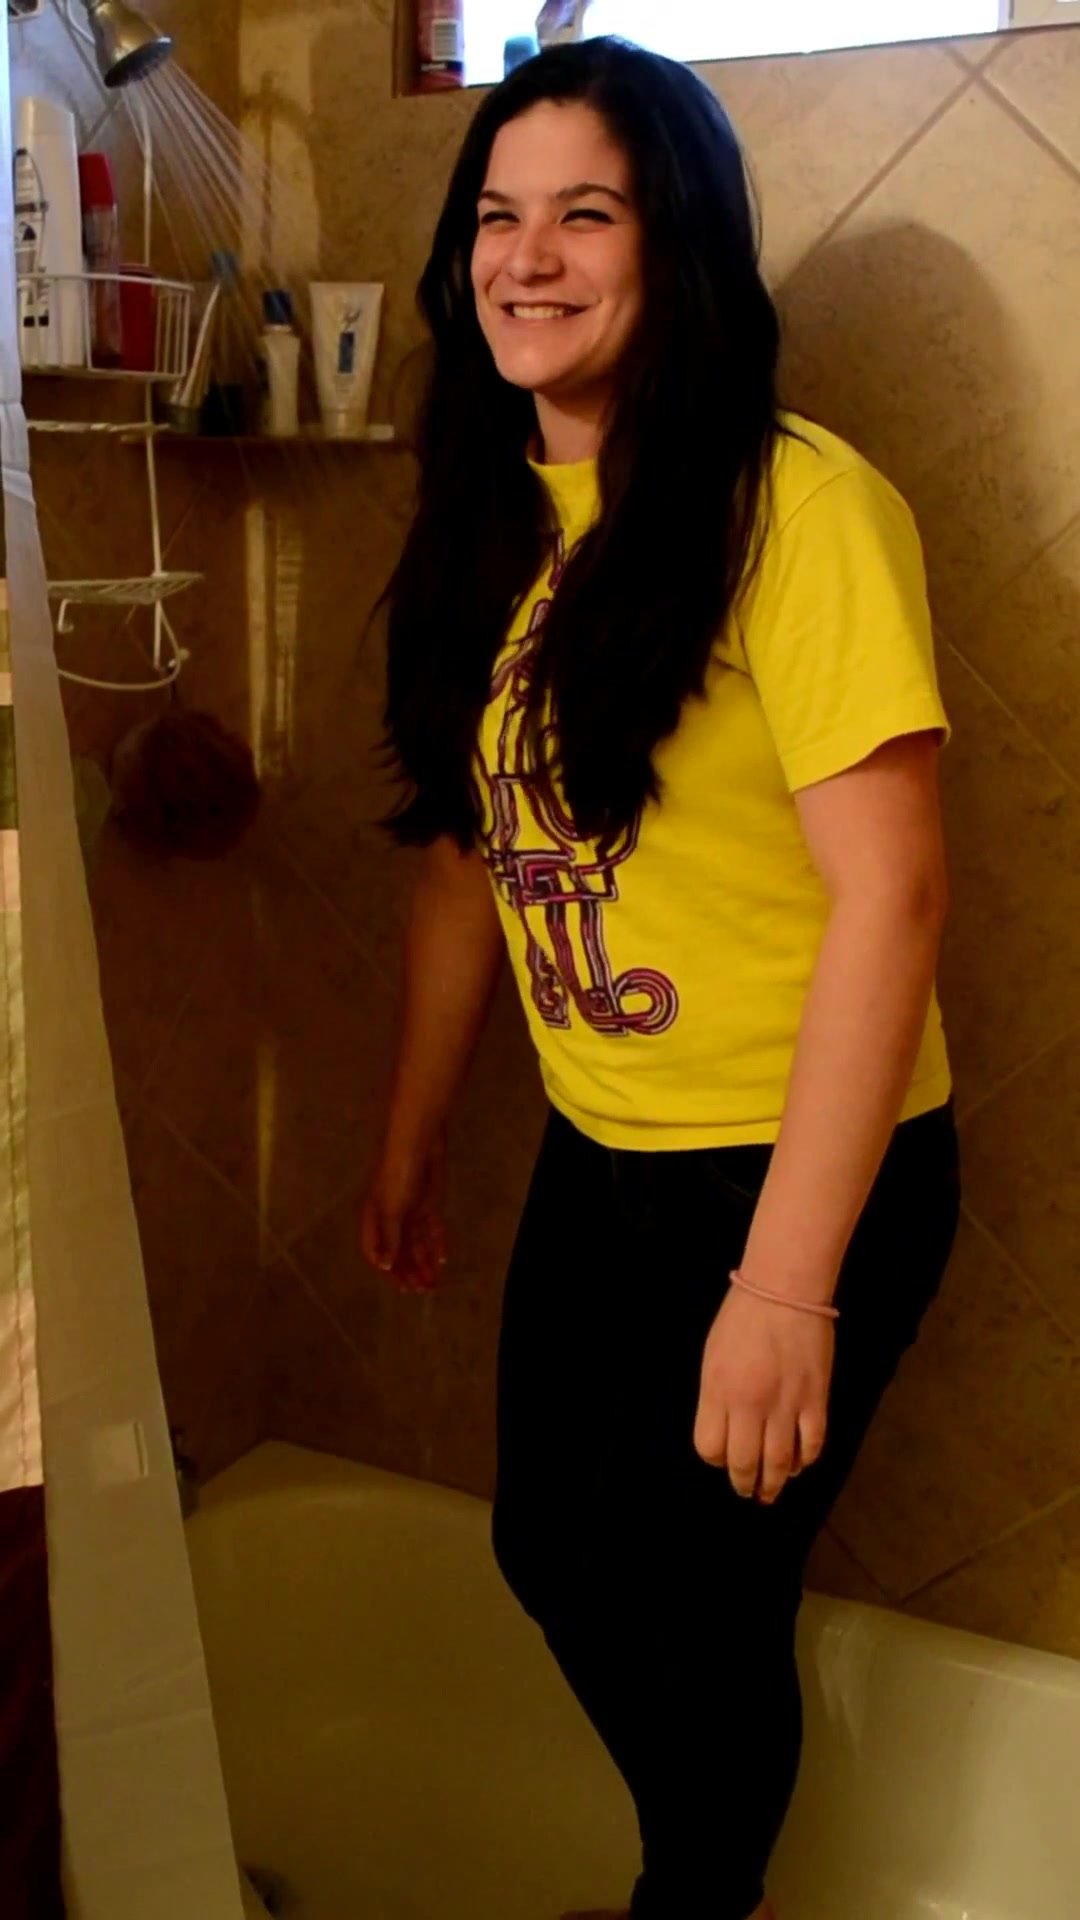 candid girl in dark jeans and yellow shirt showering